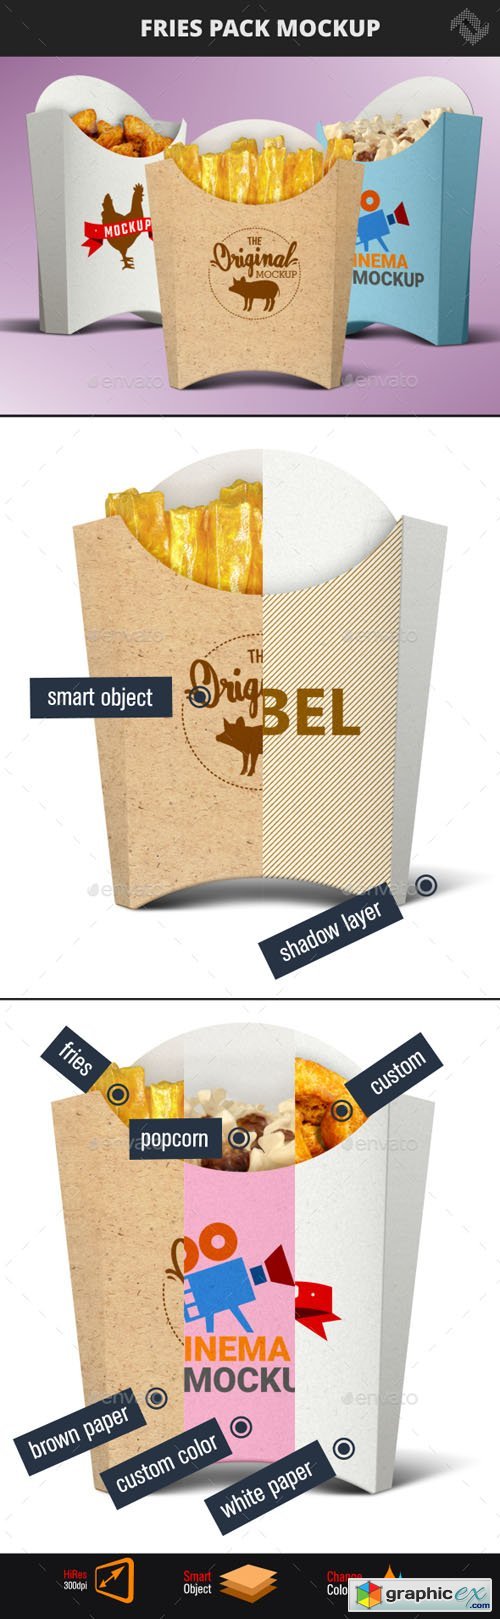 Recycled Paper French Fries Pack Mockup